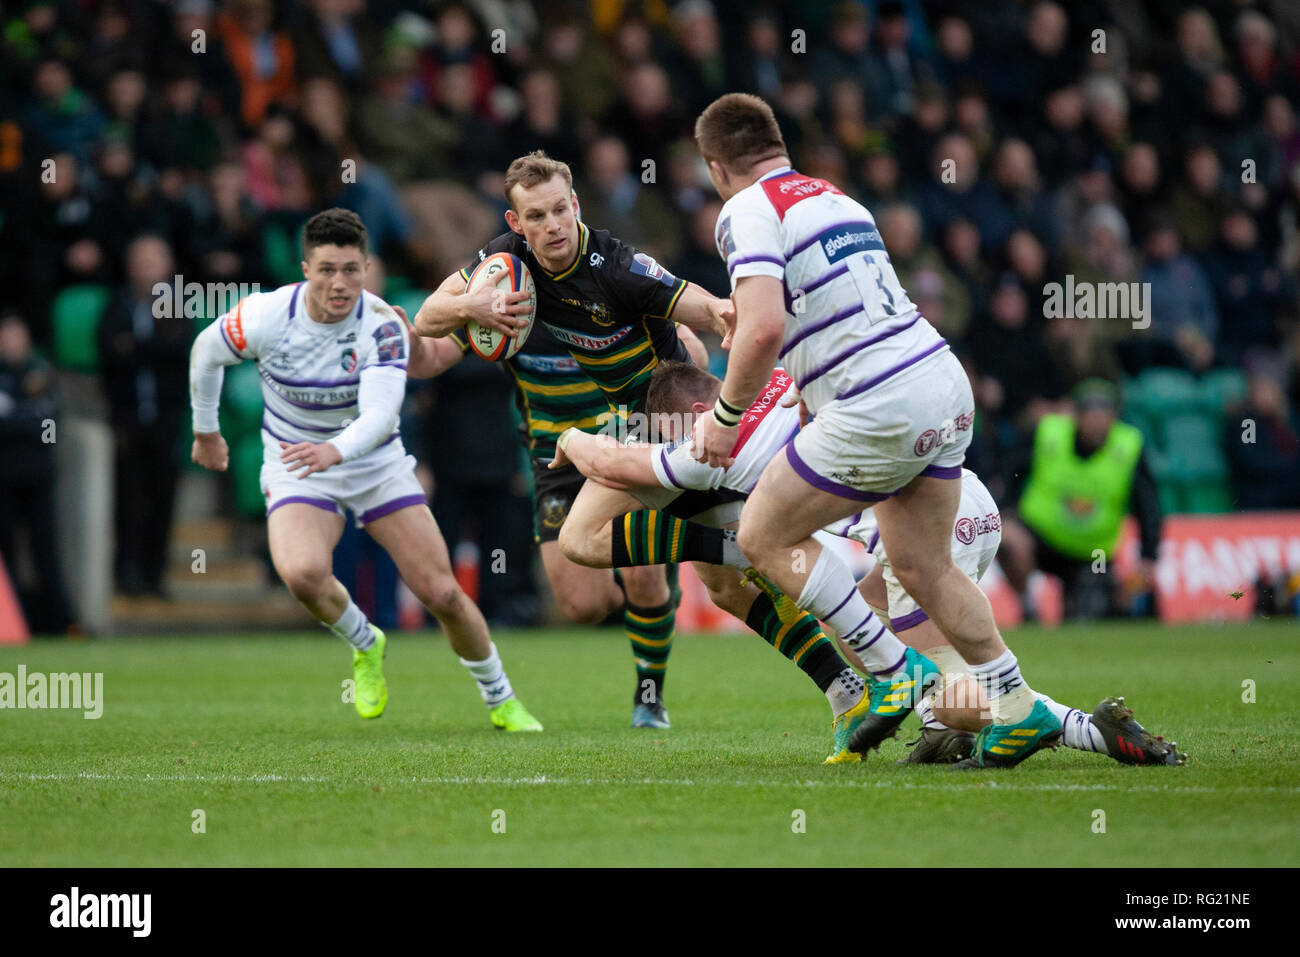 Northampton, UK. 26th January 2019. Rory Hutchinson of Northampton Saints runs with the ball during the Premiership Rugby Cup match between Northampton Saints and Leicester Tigers. Andrew Taylor/Alamy Live News Stock Photo